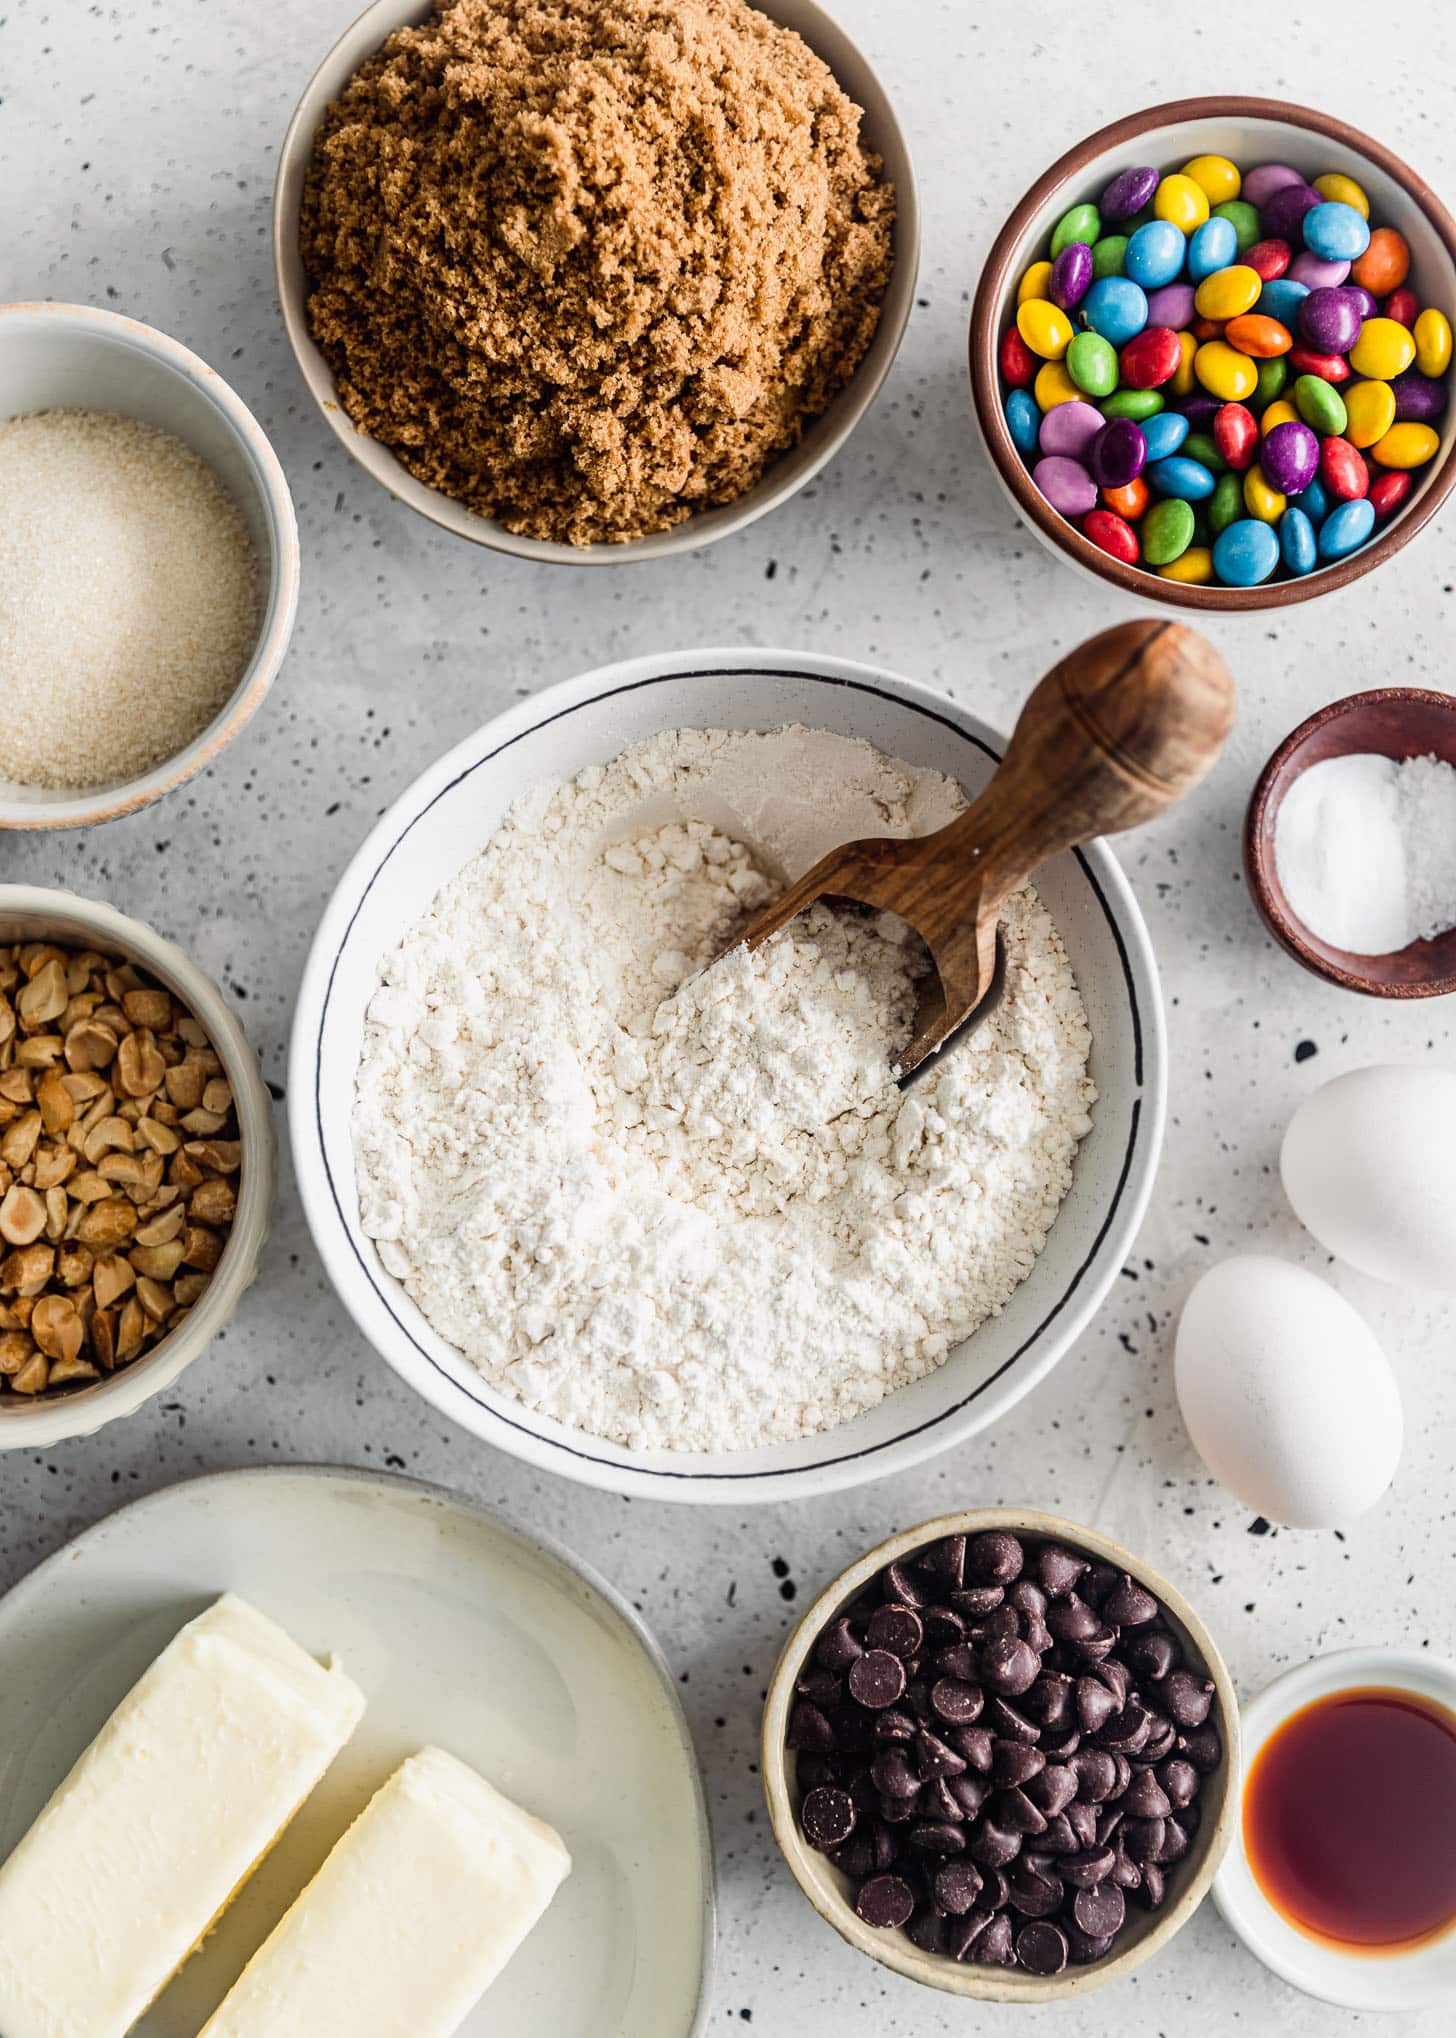 A white bowl of flour next to white bowls of flour, peanuts, sugar, brown sugar, chocolate chips, and rainbow chocolate candies on a white counter.